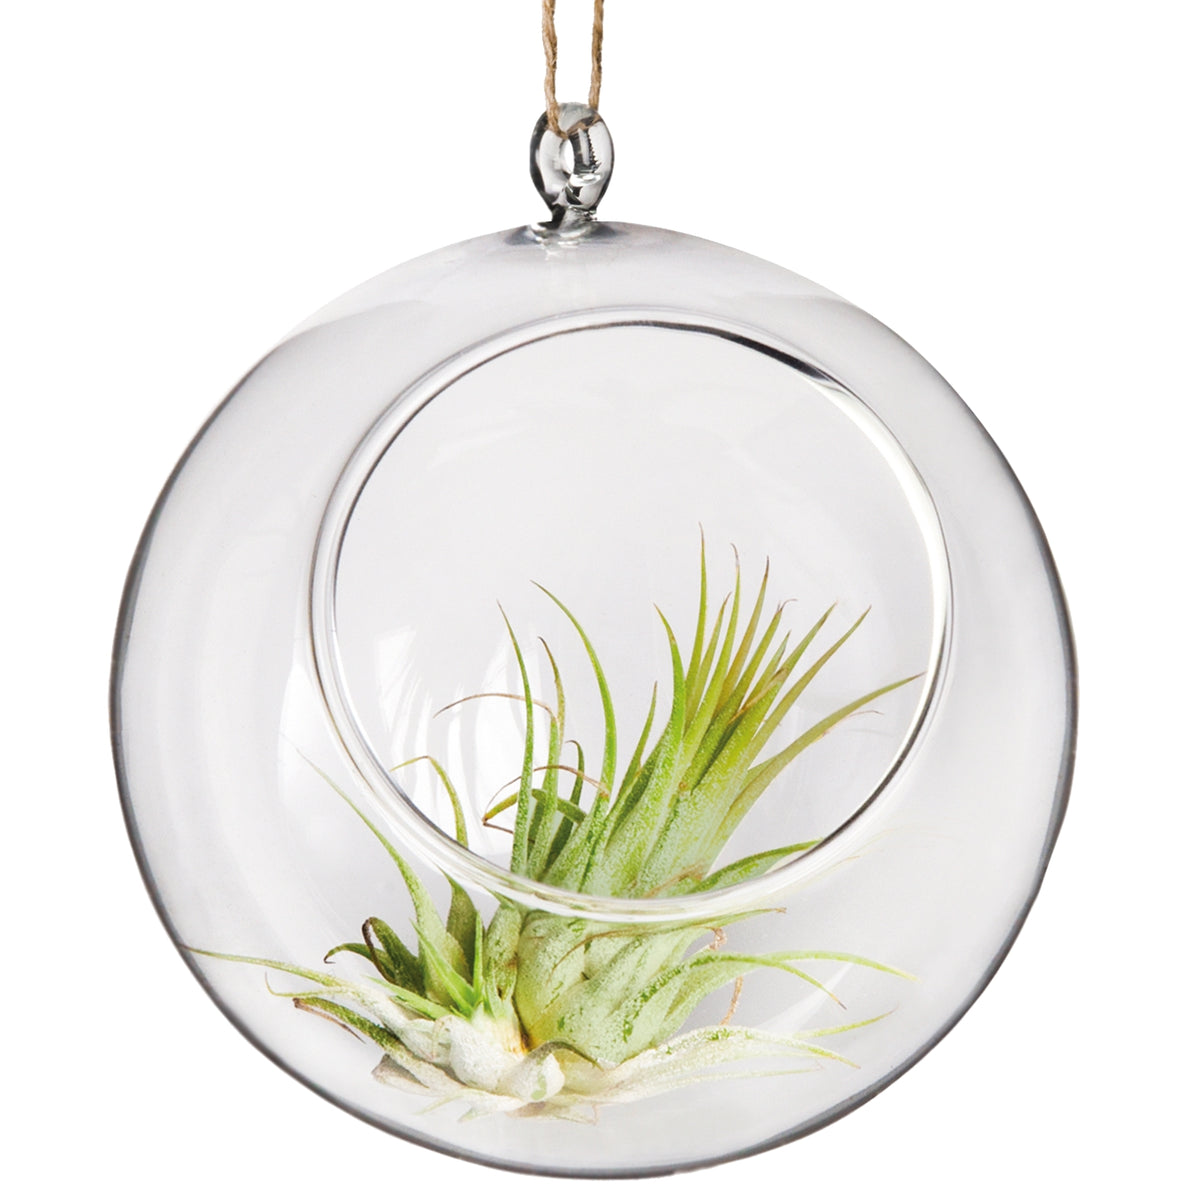 Muurla Design Decoration Ball 17cm with a small herb inside